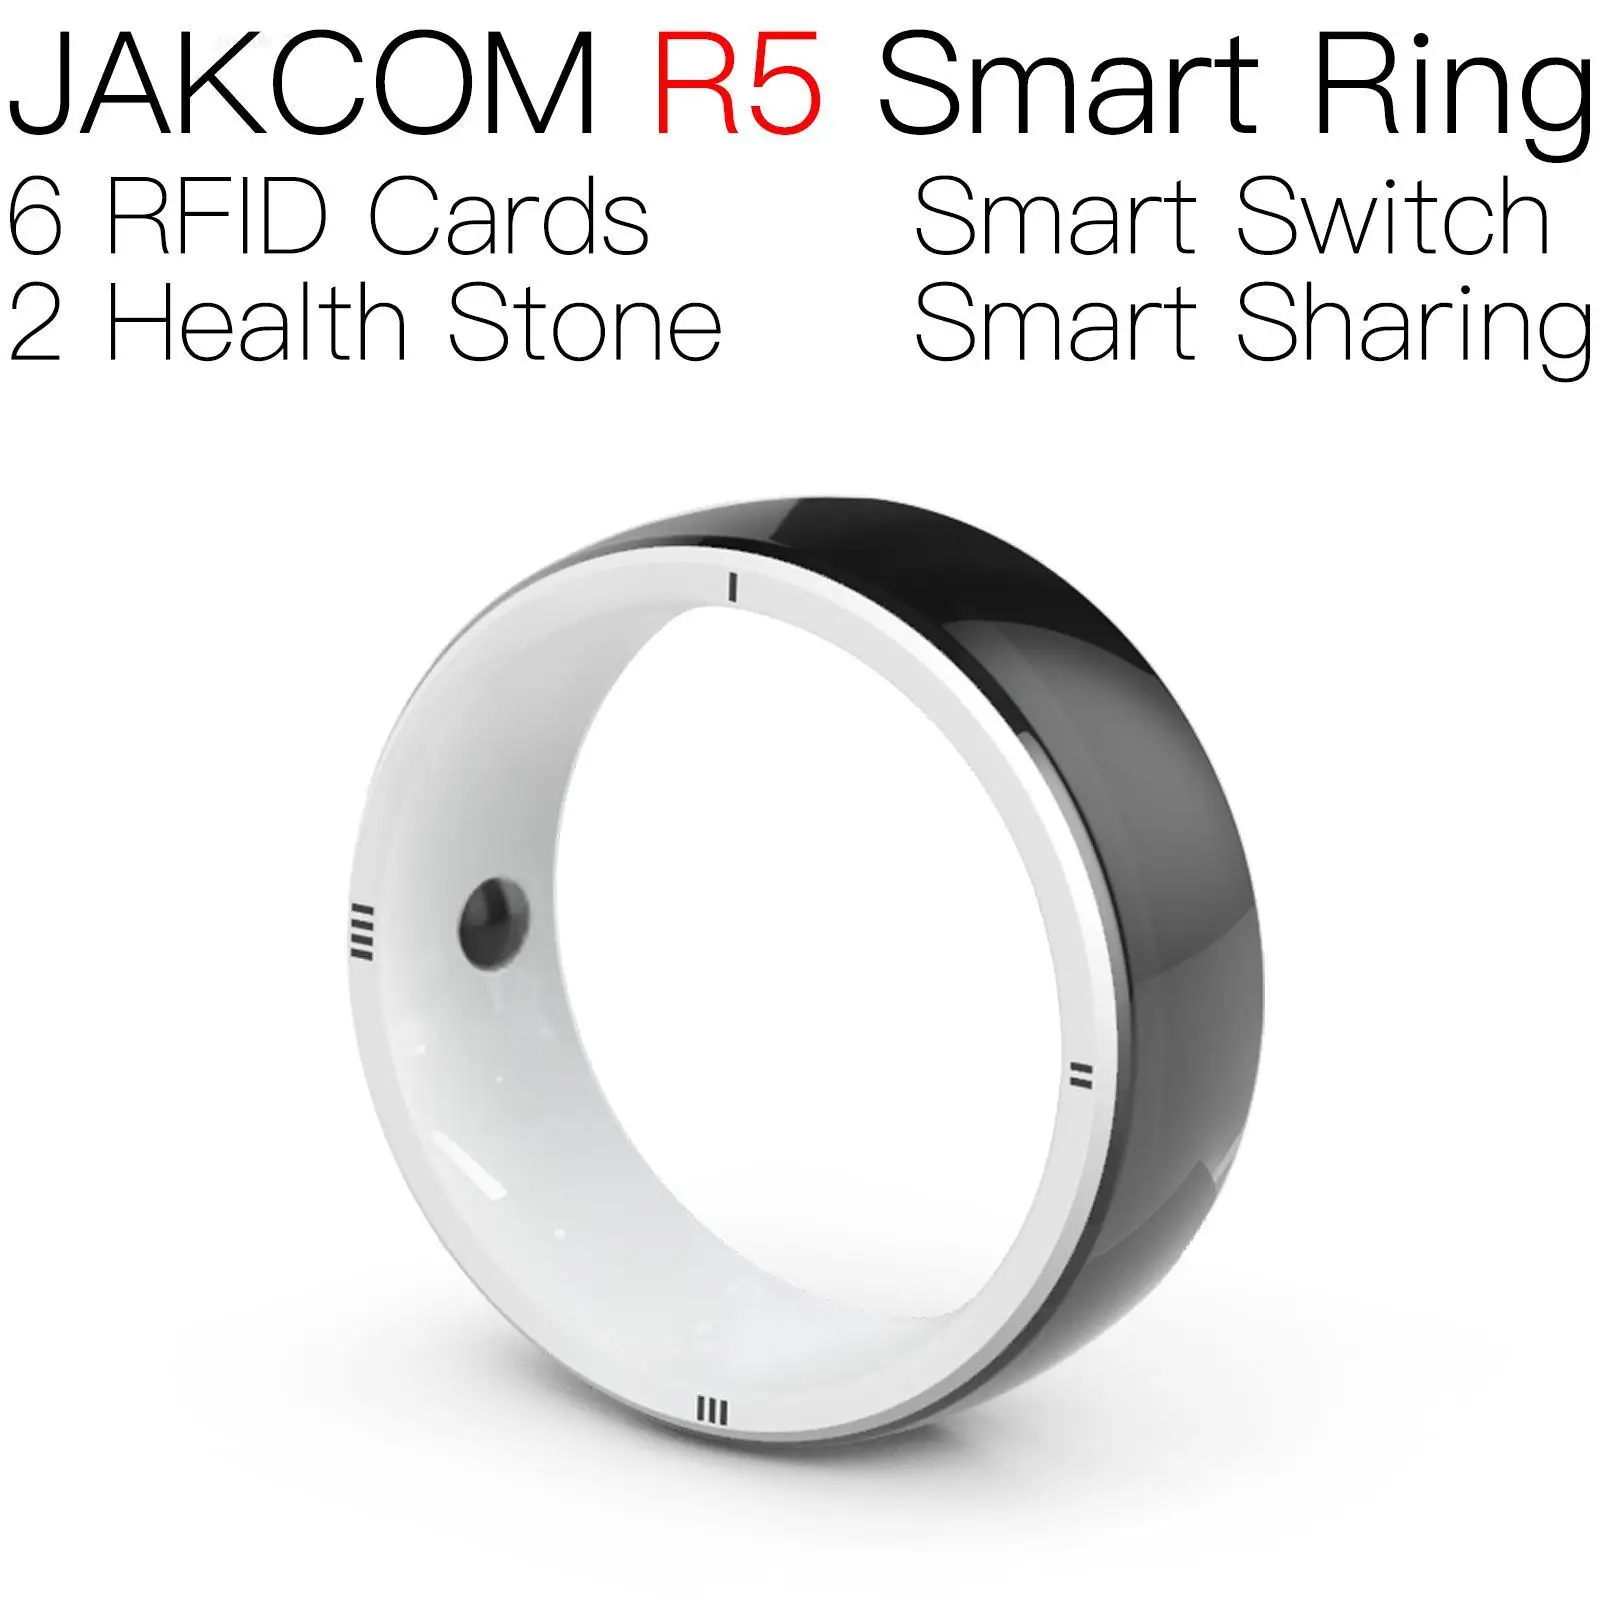 

JAKCOM R5 Smart Ring Super value as smart access control ntag metal card rupee 2 free shipping items 125khz nfc payment chip